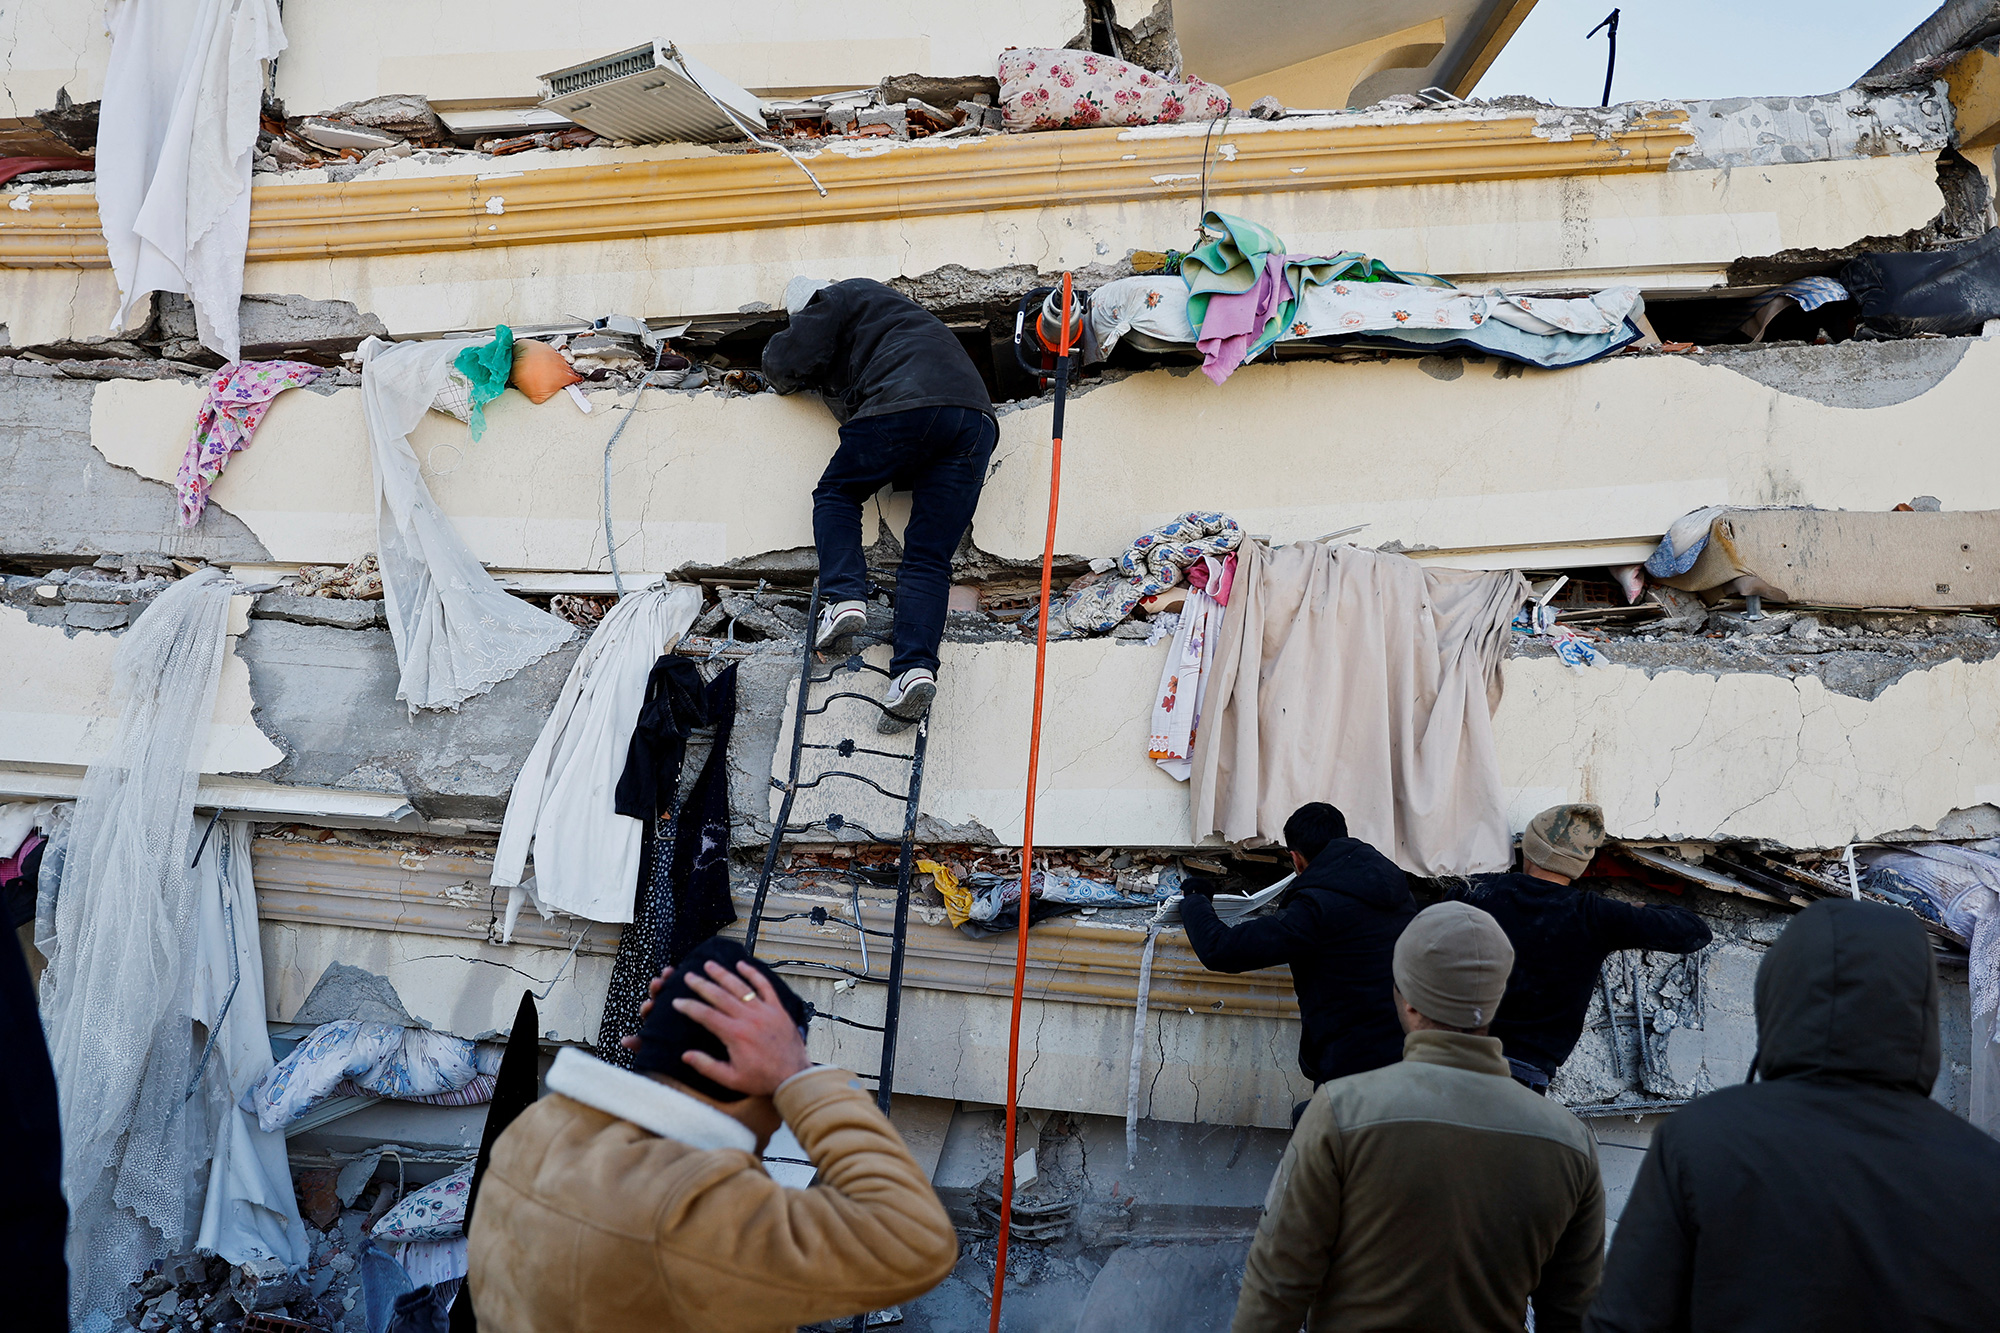 People search in the rubble at the site of a collapsed building following an earthquake in Kahramanmaras, Turkey, on February 7.